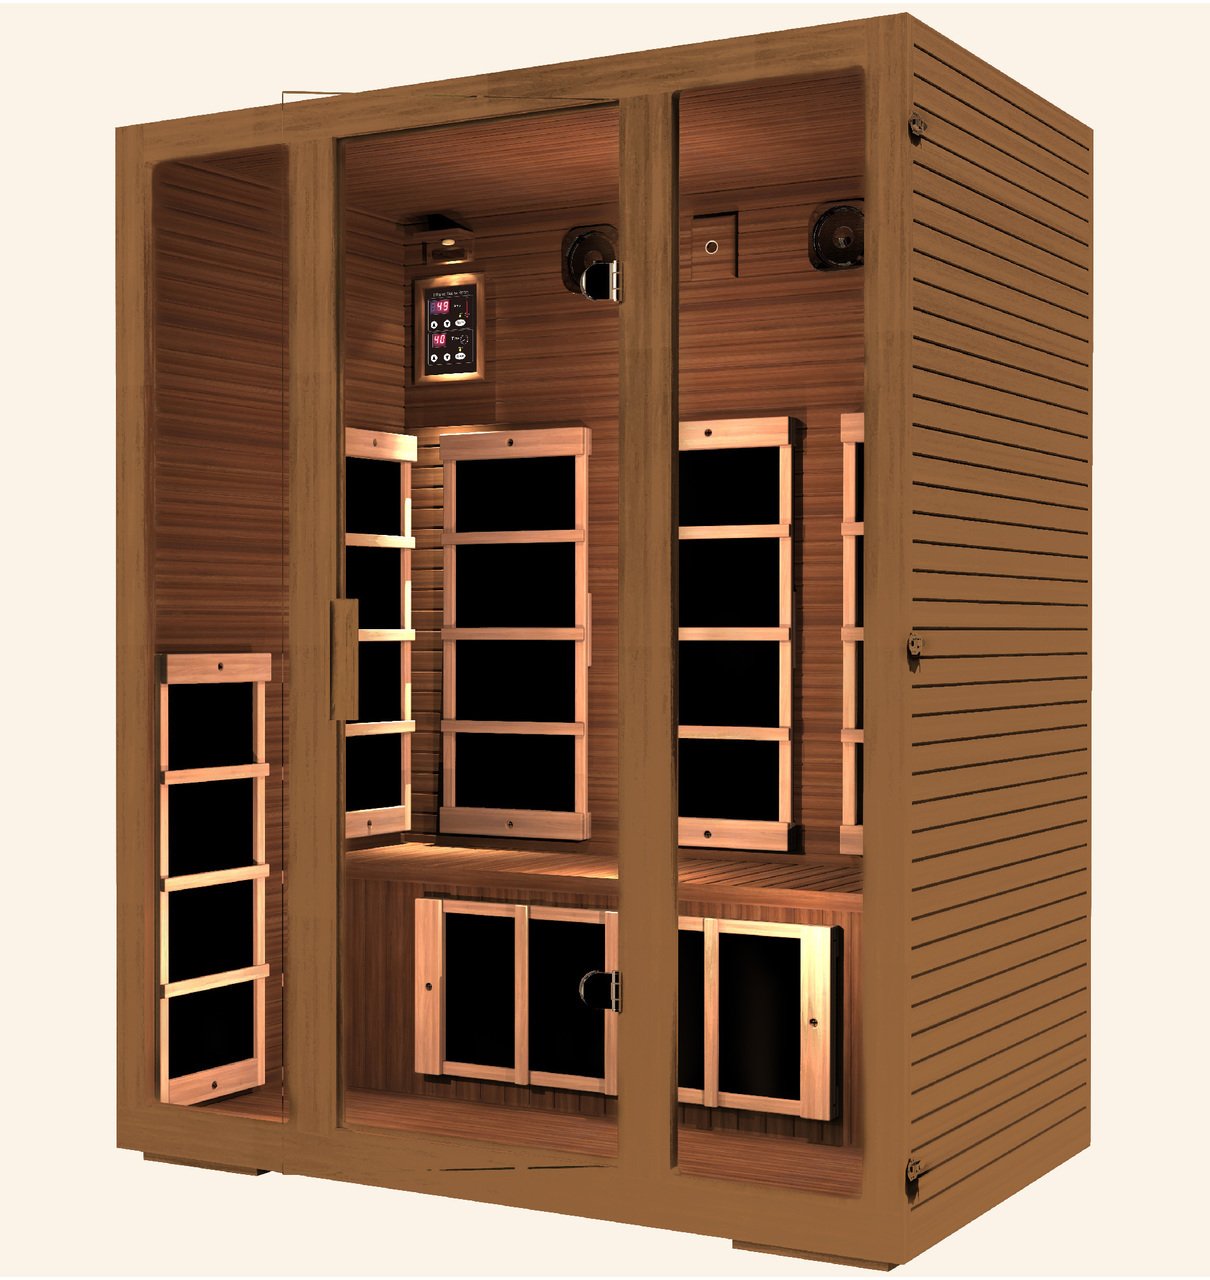 JNH LifeStyles Freedom 3 Person Sauna designed with special safety glass.